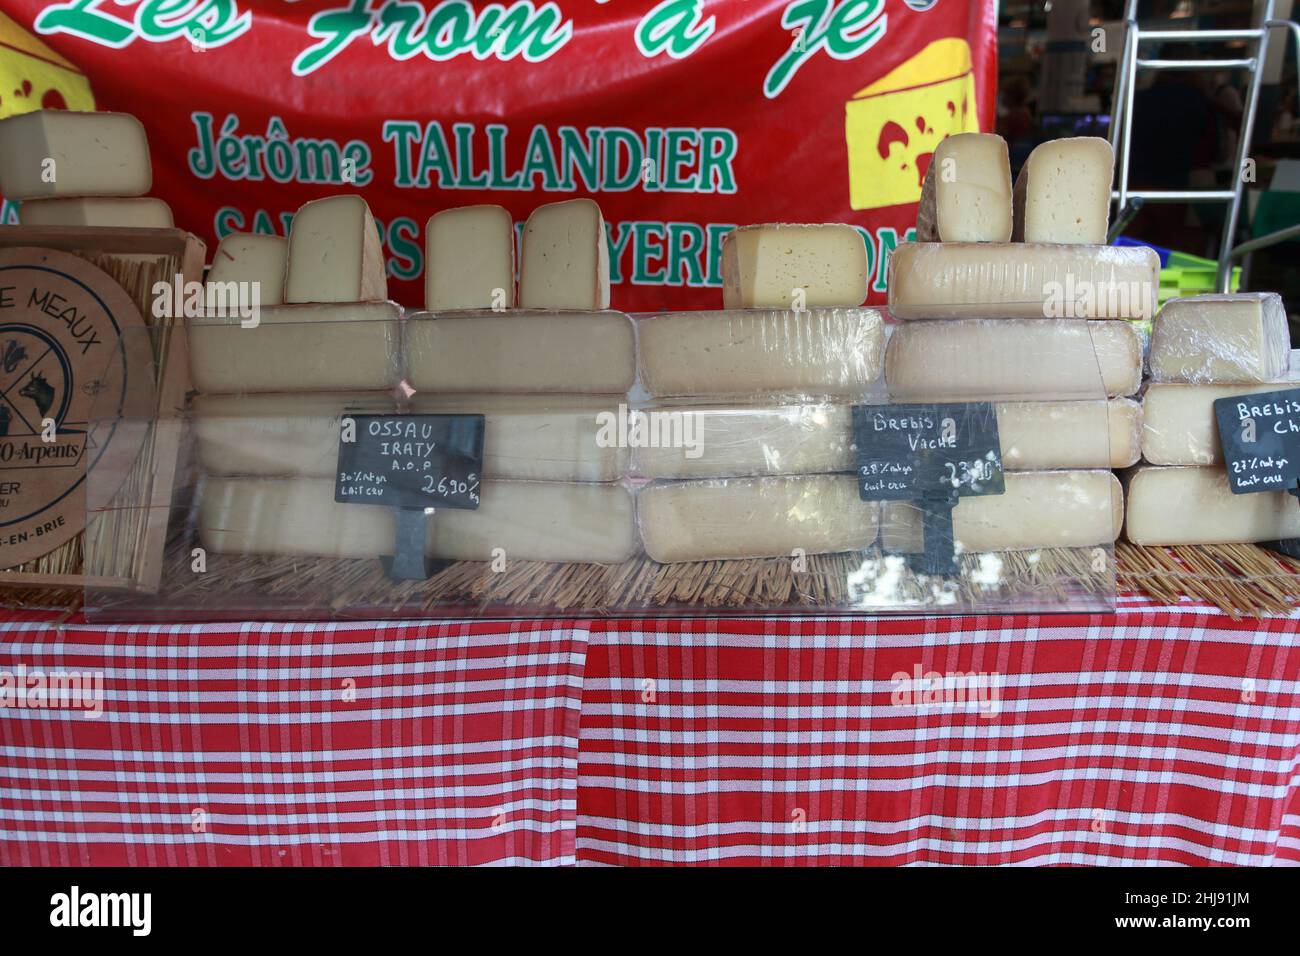 Fromage des Pyrenees (Pyrenean cheese) sold at St Jean de Luz market,  France Stock Photo